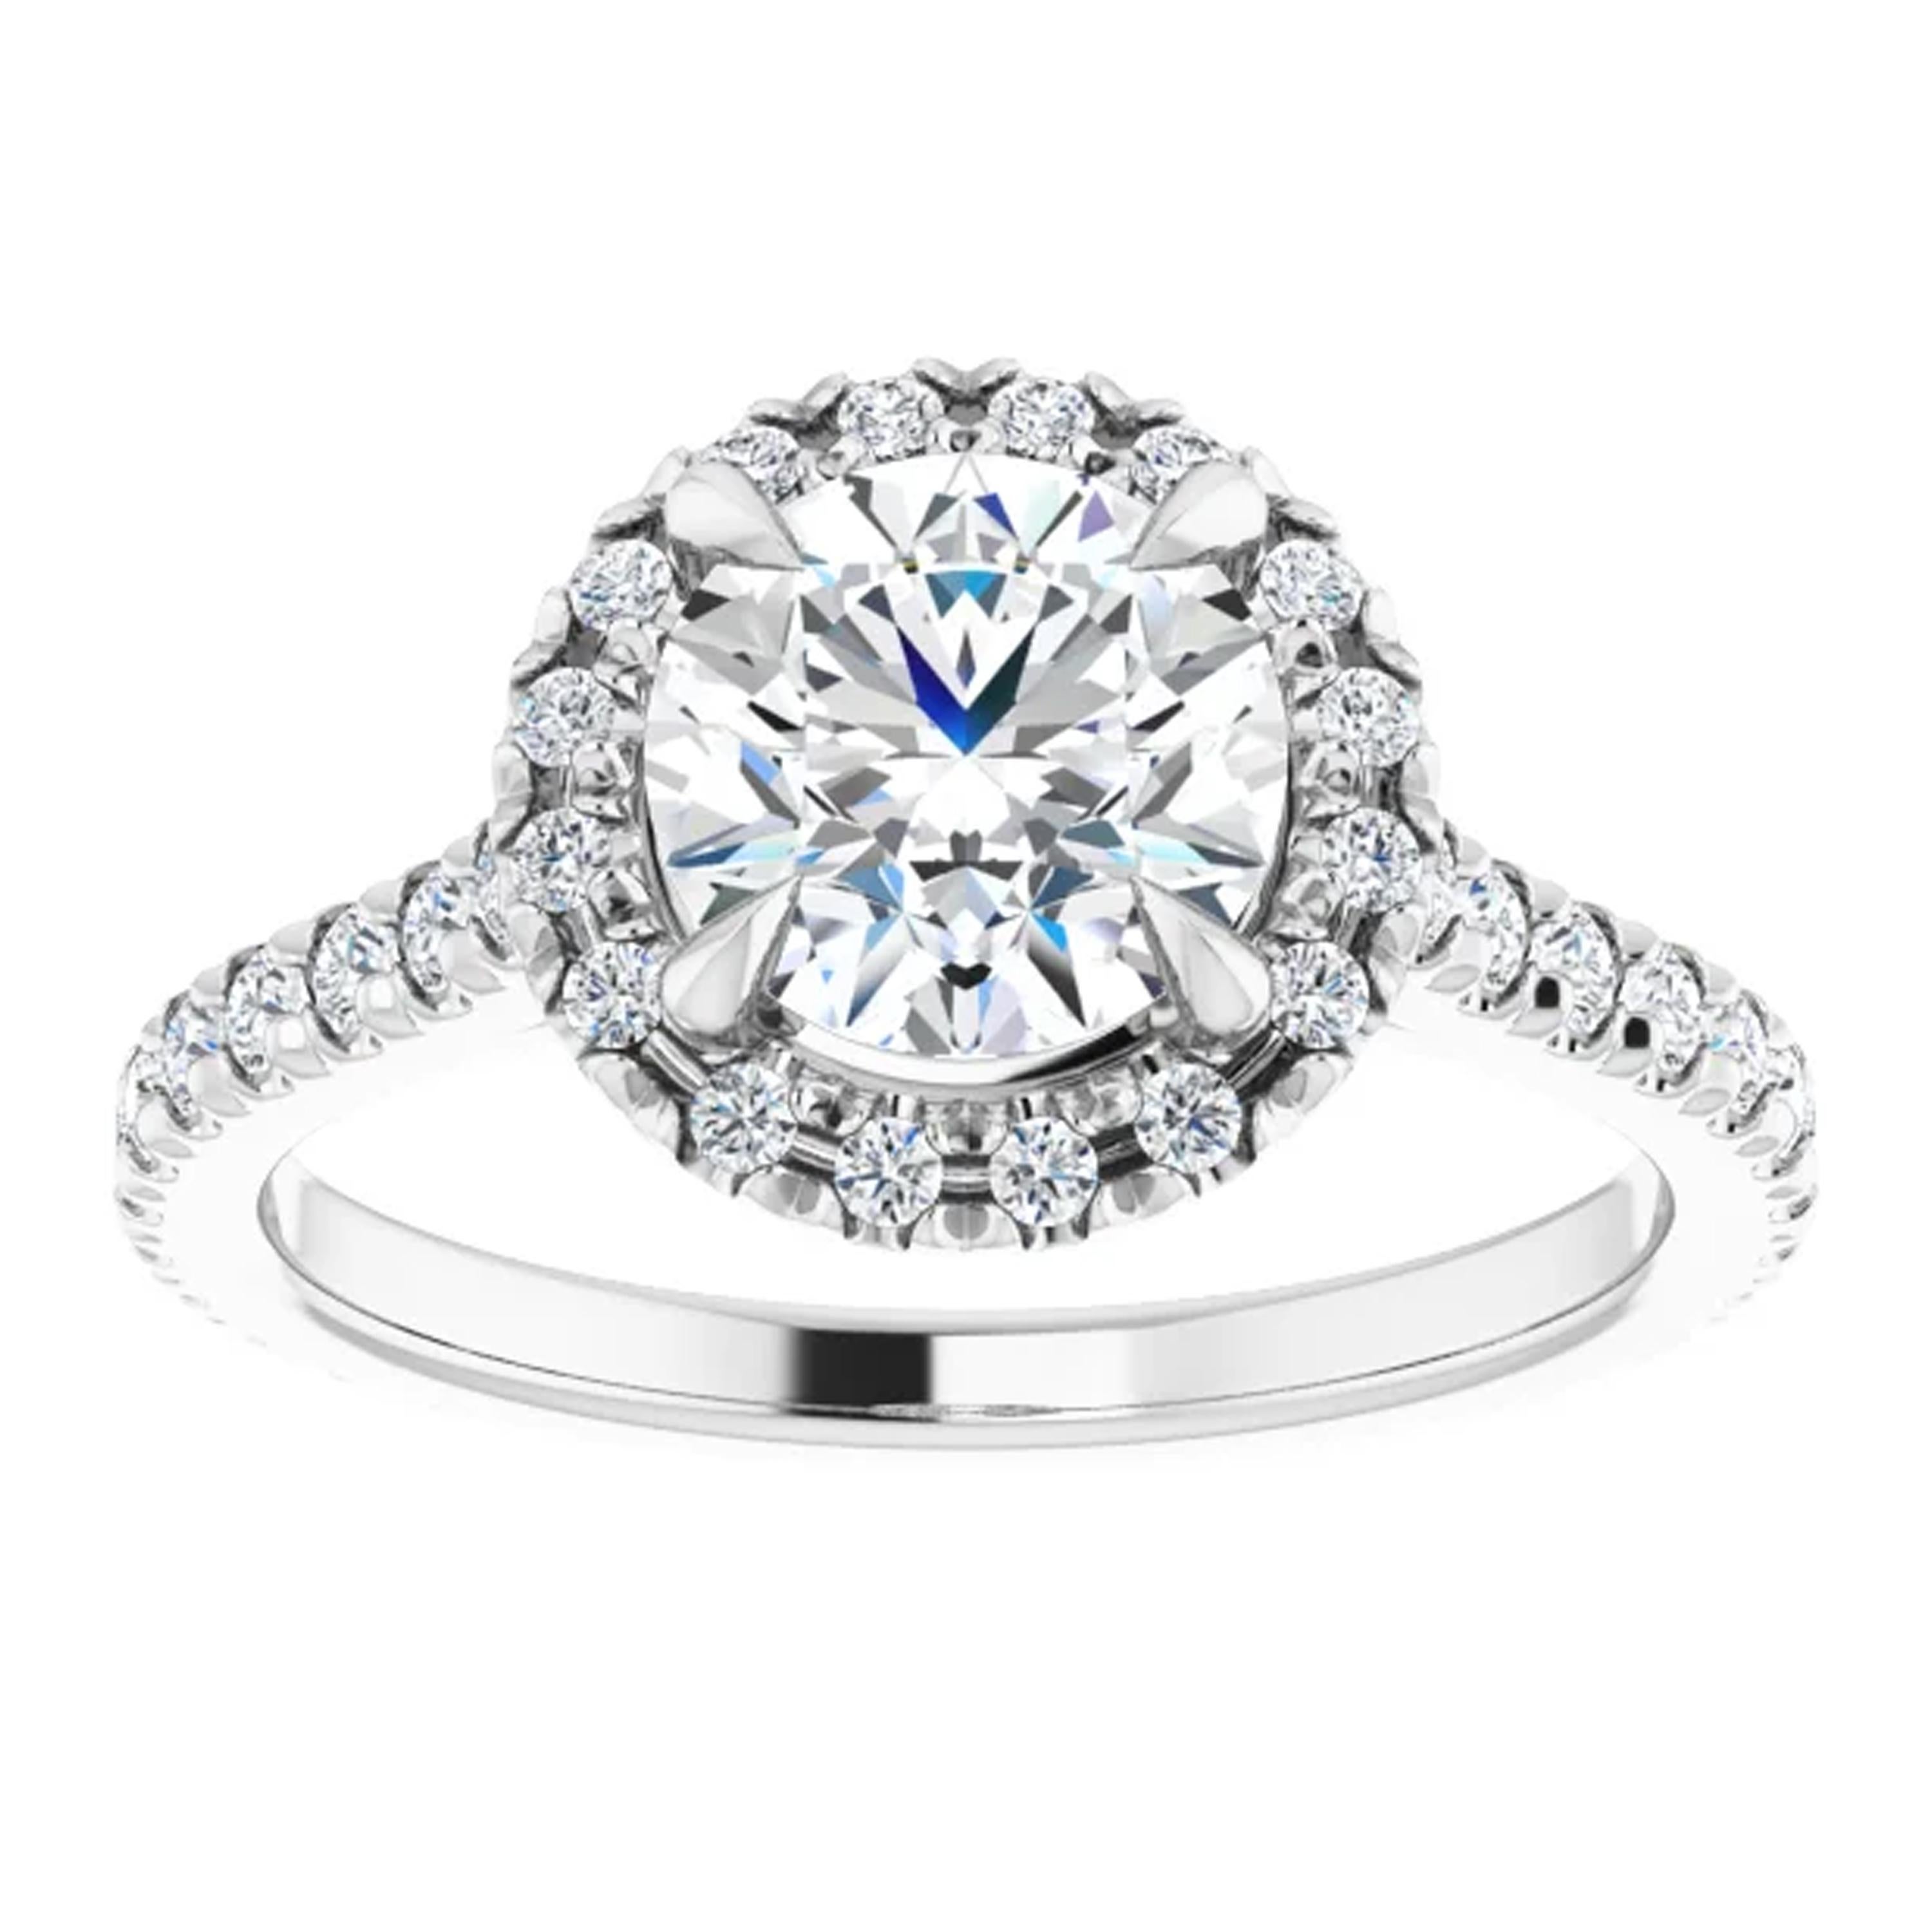 French pave diamonds with extraordinary light performance line the eternity shank of this engagement ring. Amplified by a halo of additional French pave diamonds, the round brilliant GIA certified center diamond twinkles in the center. Seal your